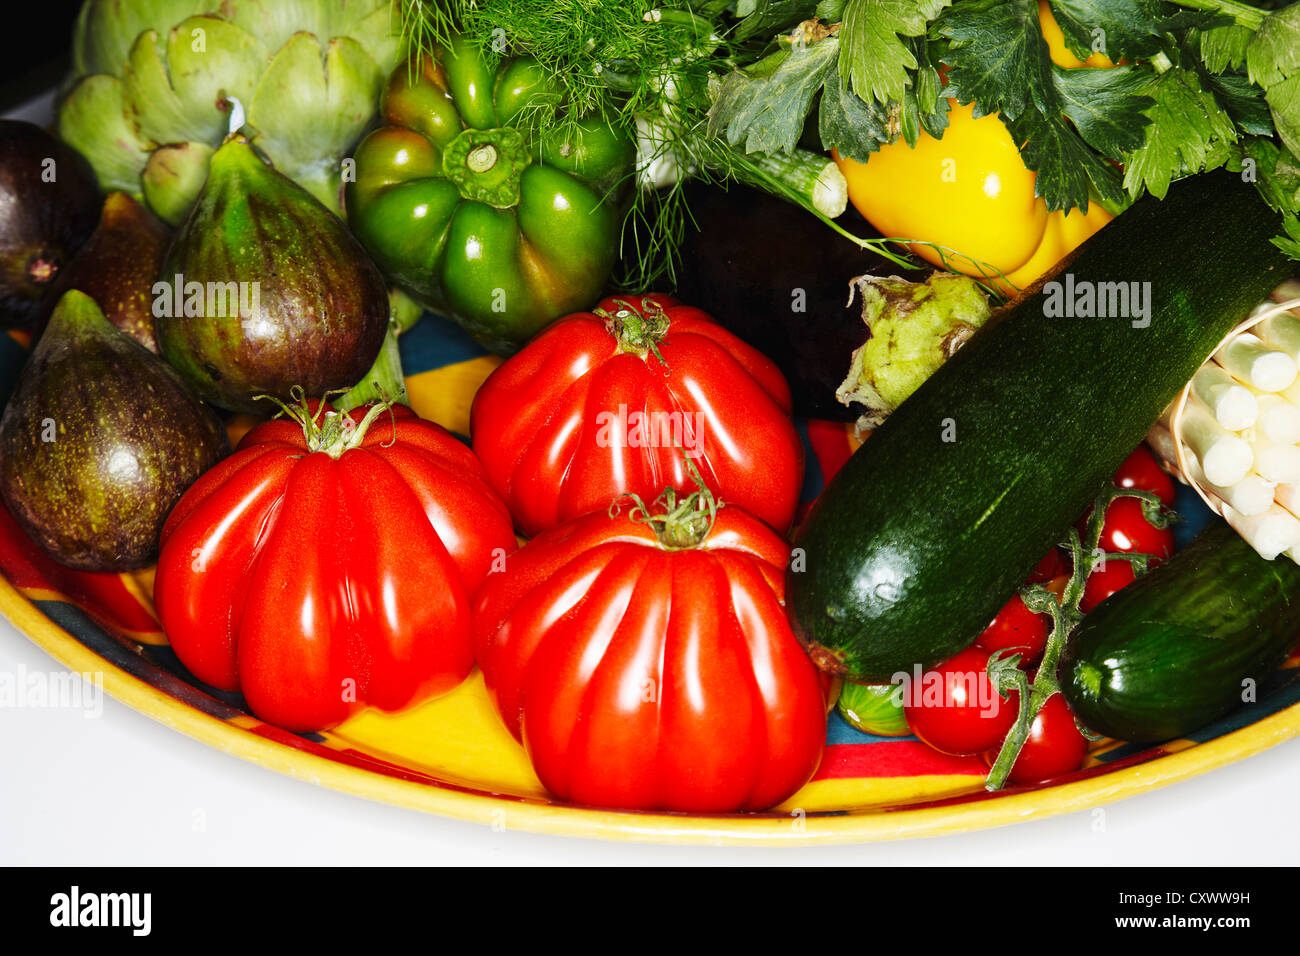 Plate of assorted vegetables Stock Photo